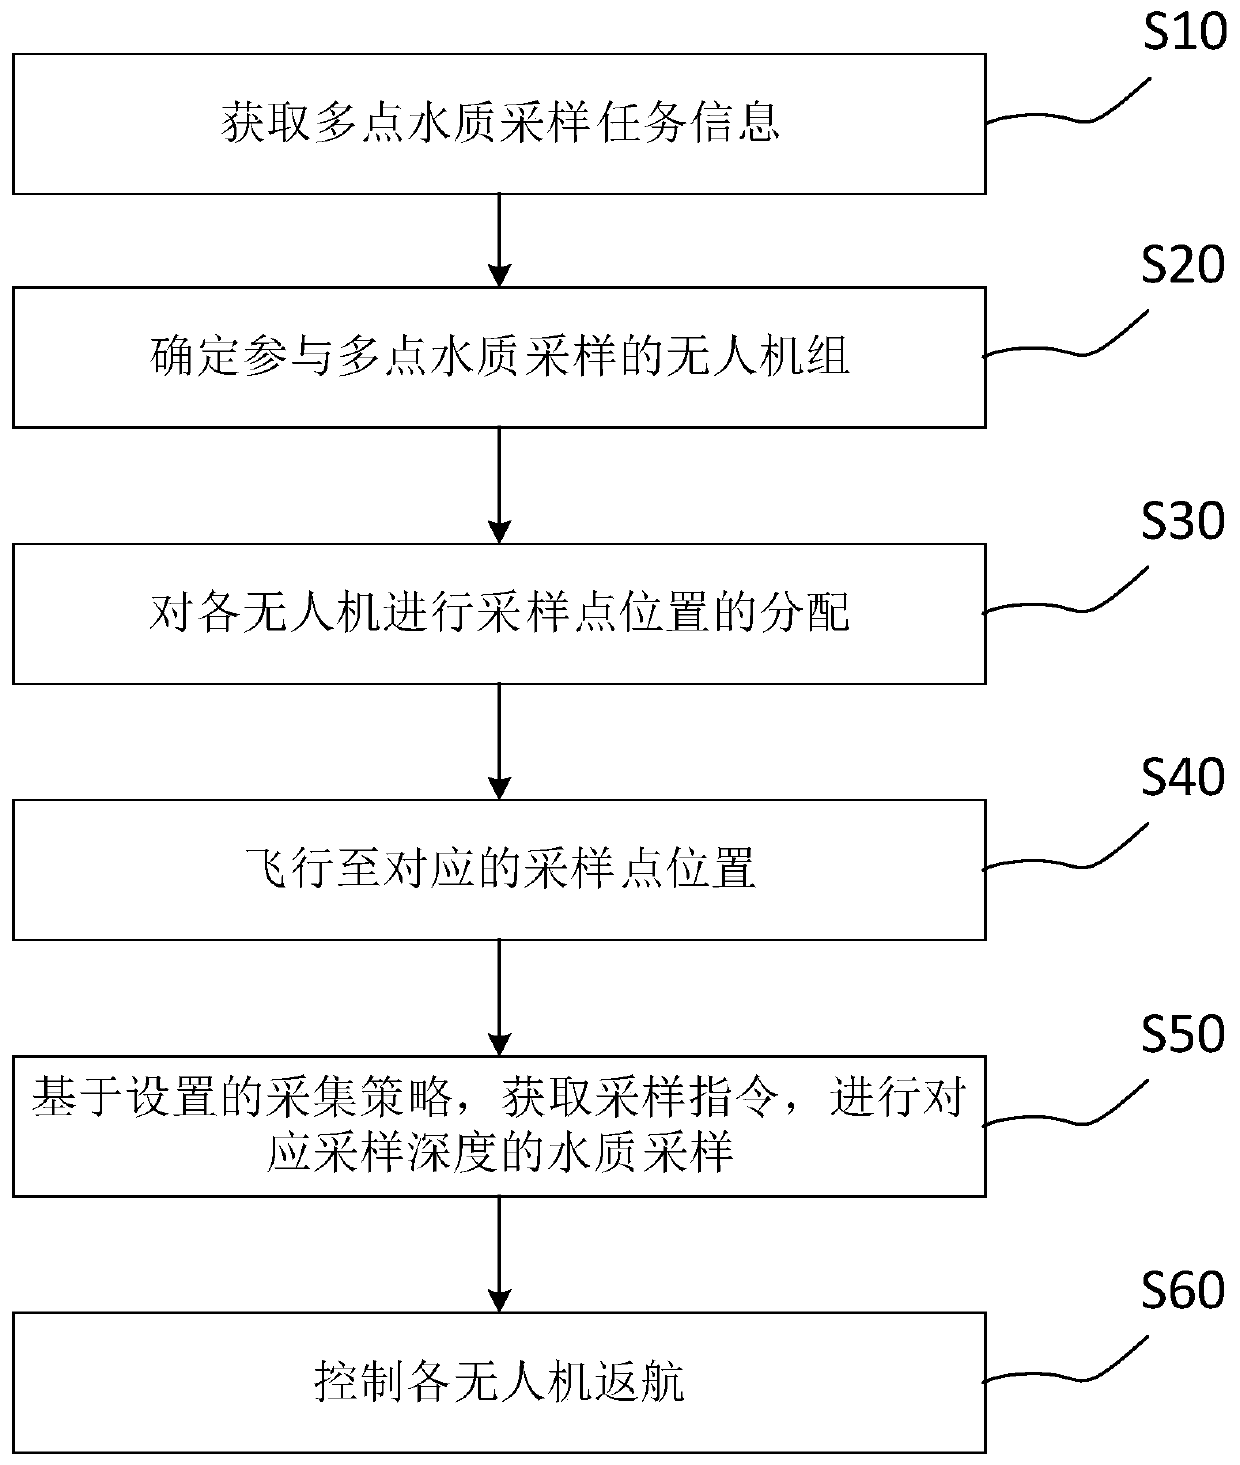 Multi-unmanned aerial vehicle cooperation method, system and device for multi-point water quality sampling